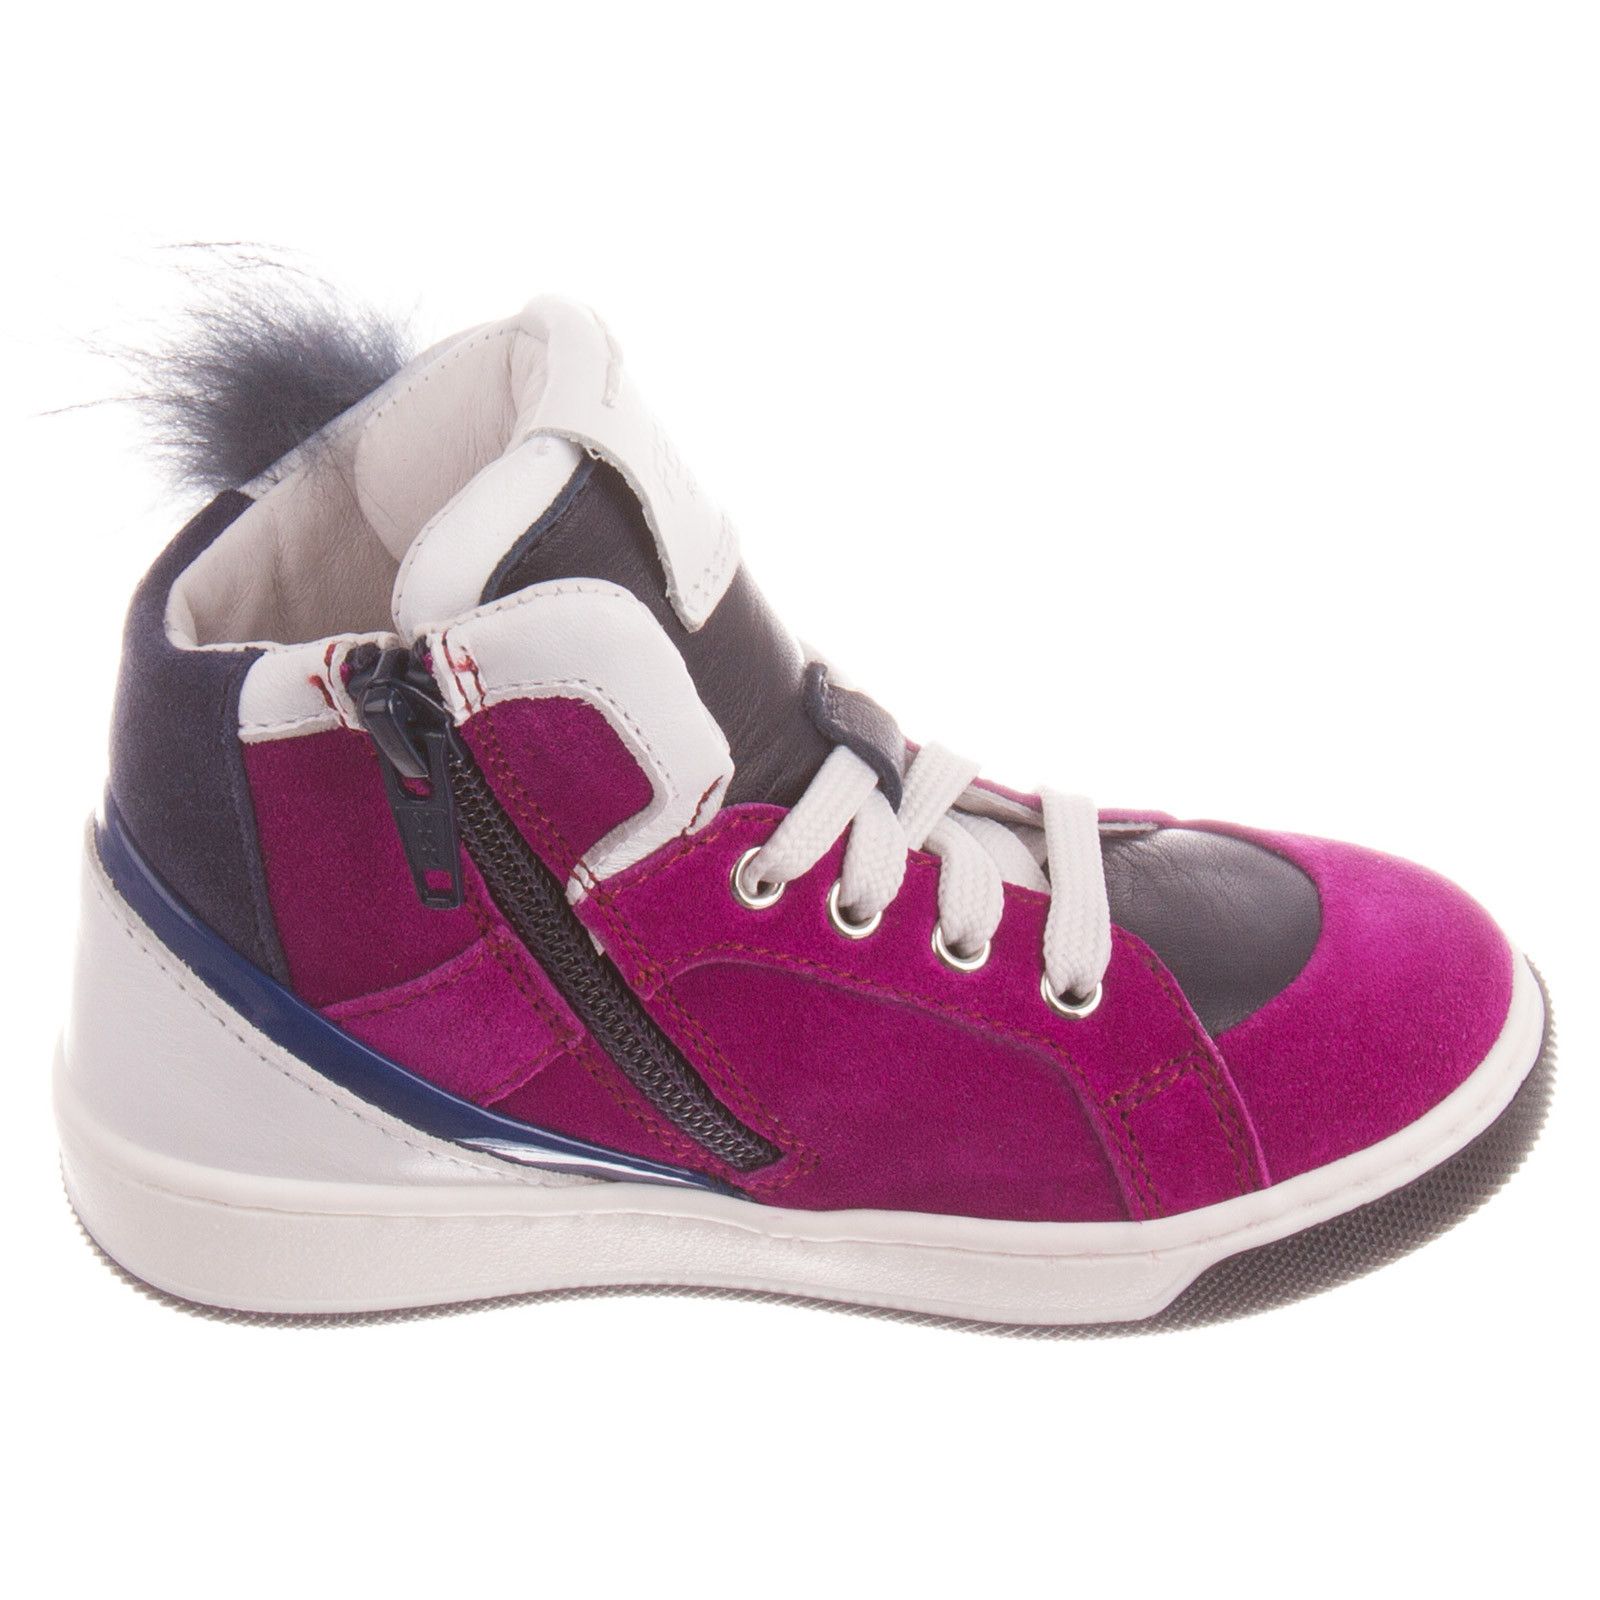 Boys&Girls Purple Suede High-top Trainers With Fur - CÉMAROSE | Children's Fashion Store - 5